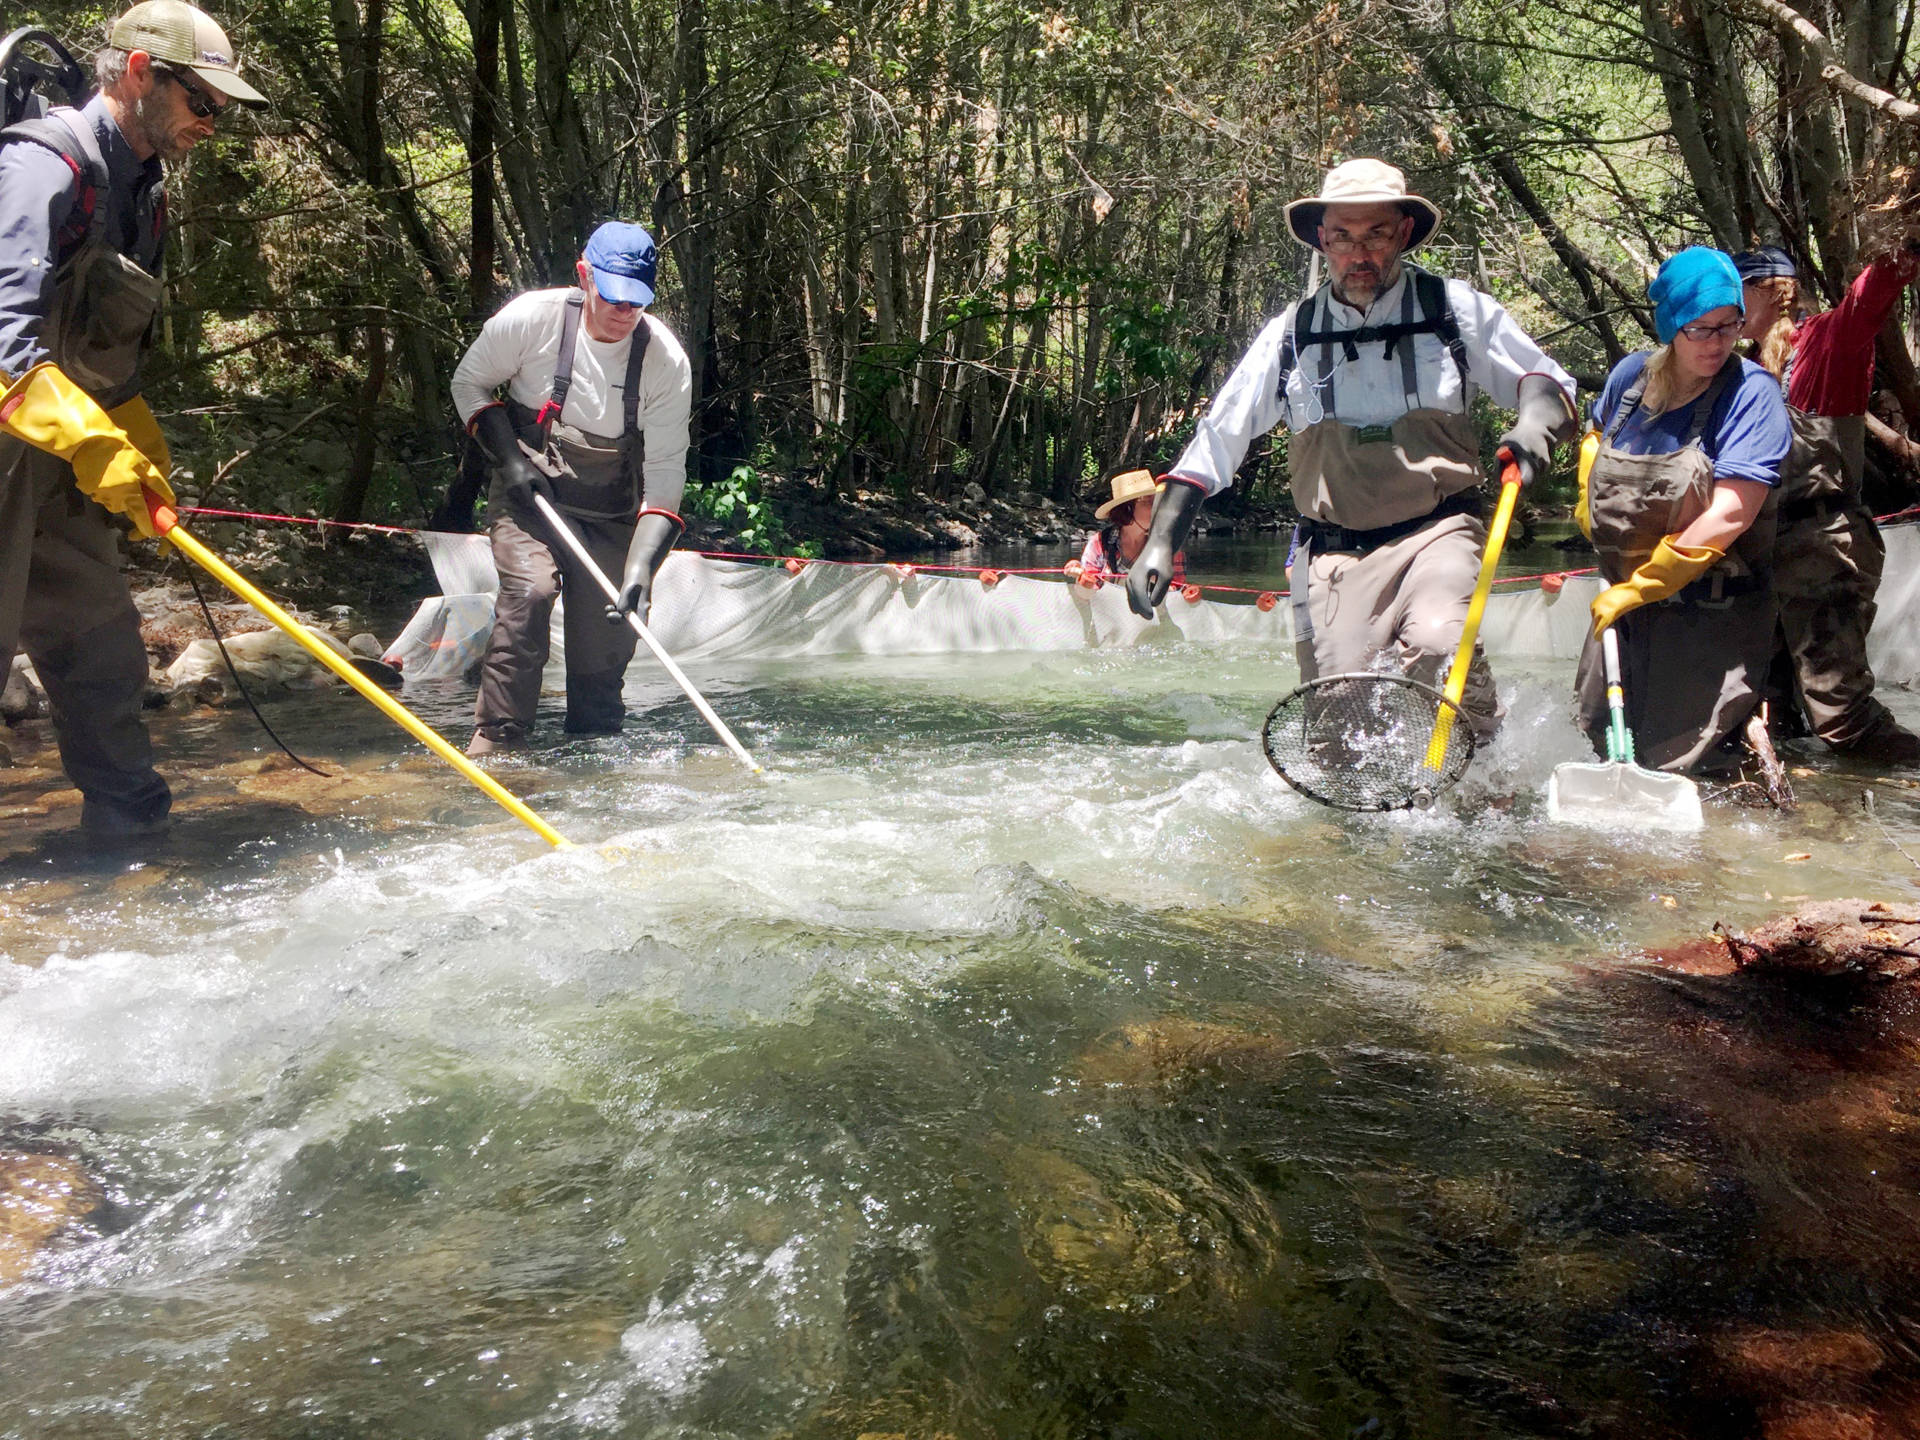 From left to right: Scientists Dave Rundio, Nate Mantua, Tommy Williams, Laeticia Wilkins, and Heidi Fish. Rundio and Williams use electrofishers to catch steelhead trout on the Carmel River in Monterey County. Lindsey Hoshaw/KQED